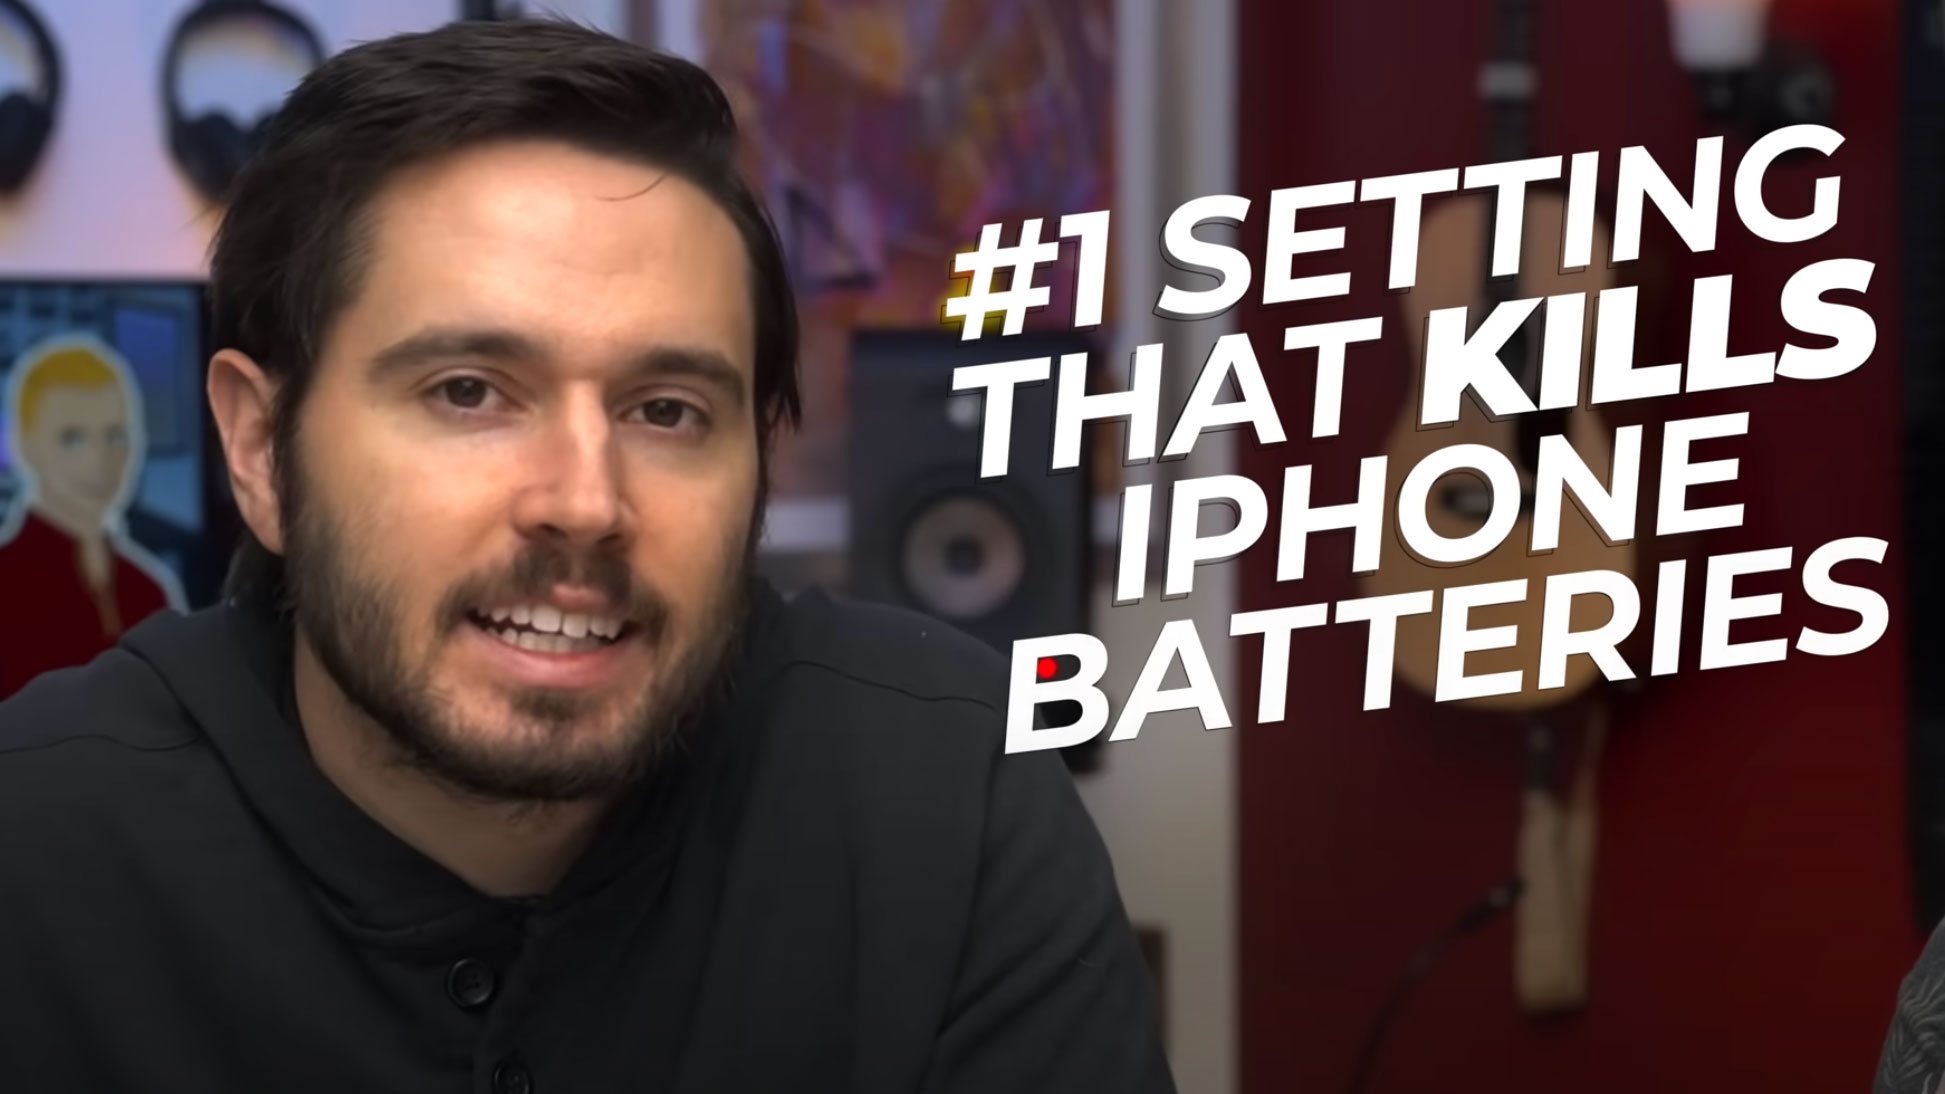 This must-see video shares how to improve your iPhone battery life